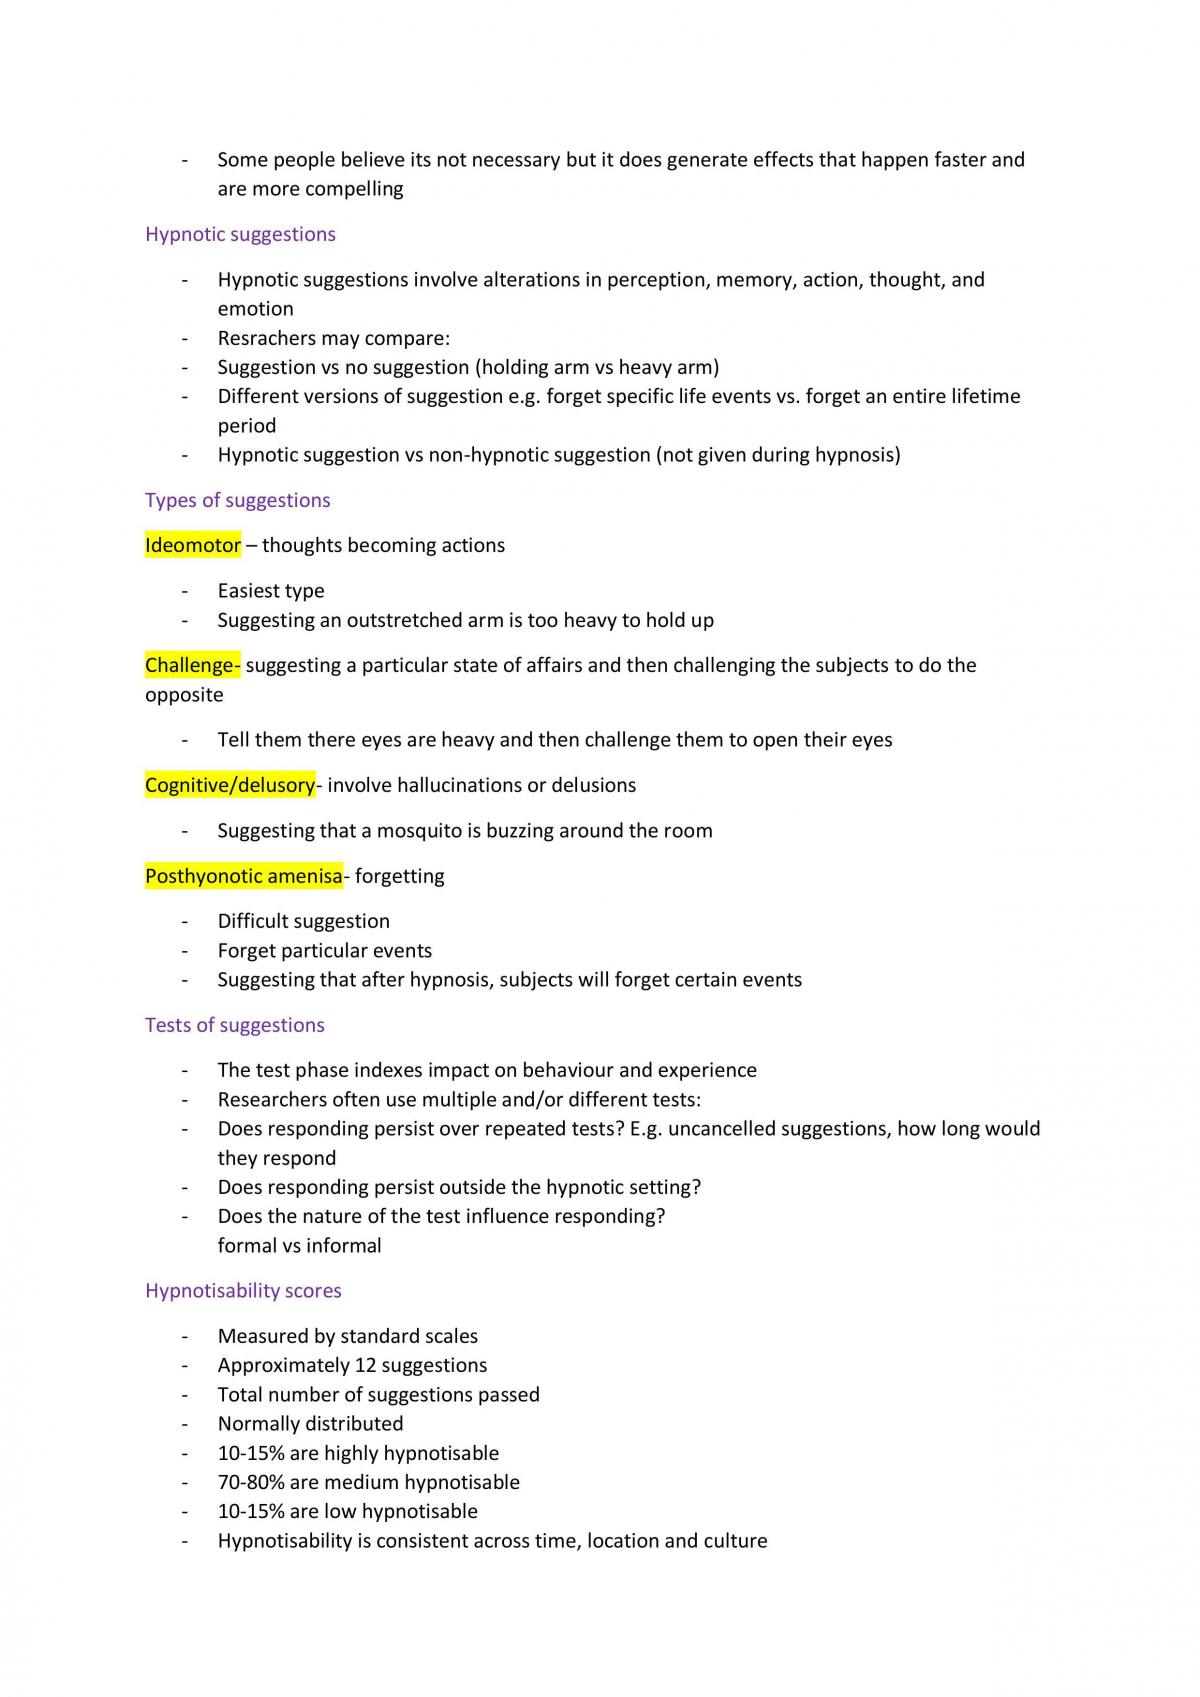 Cogs101 Notes - Page 44